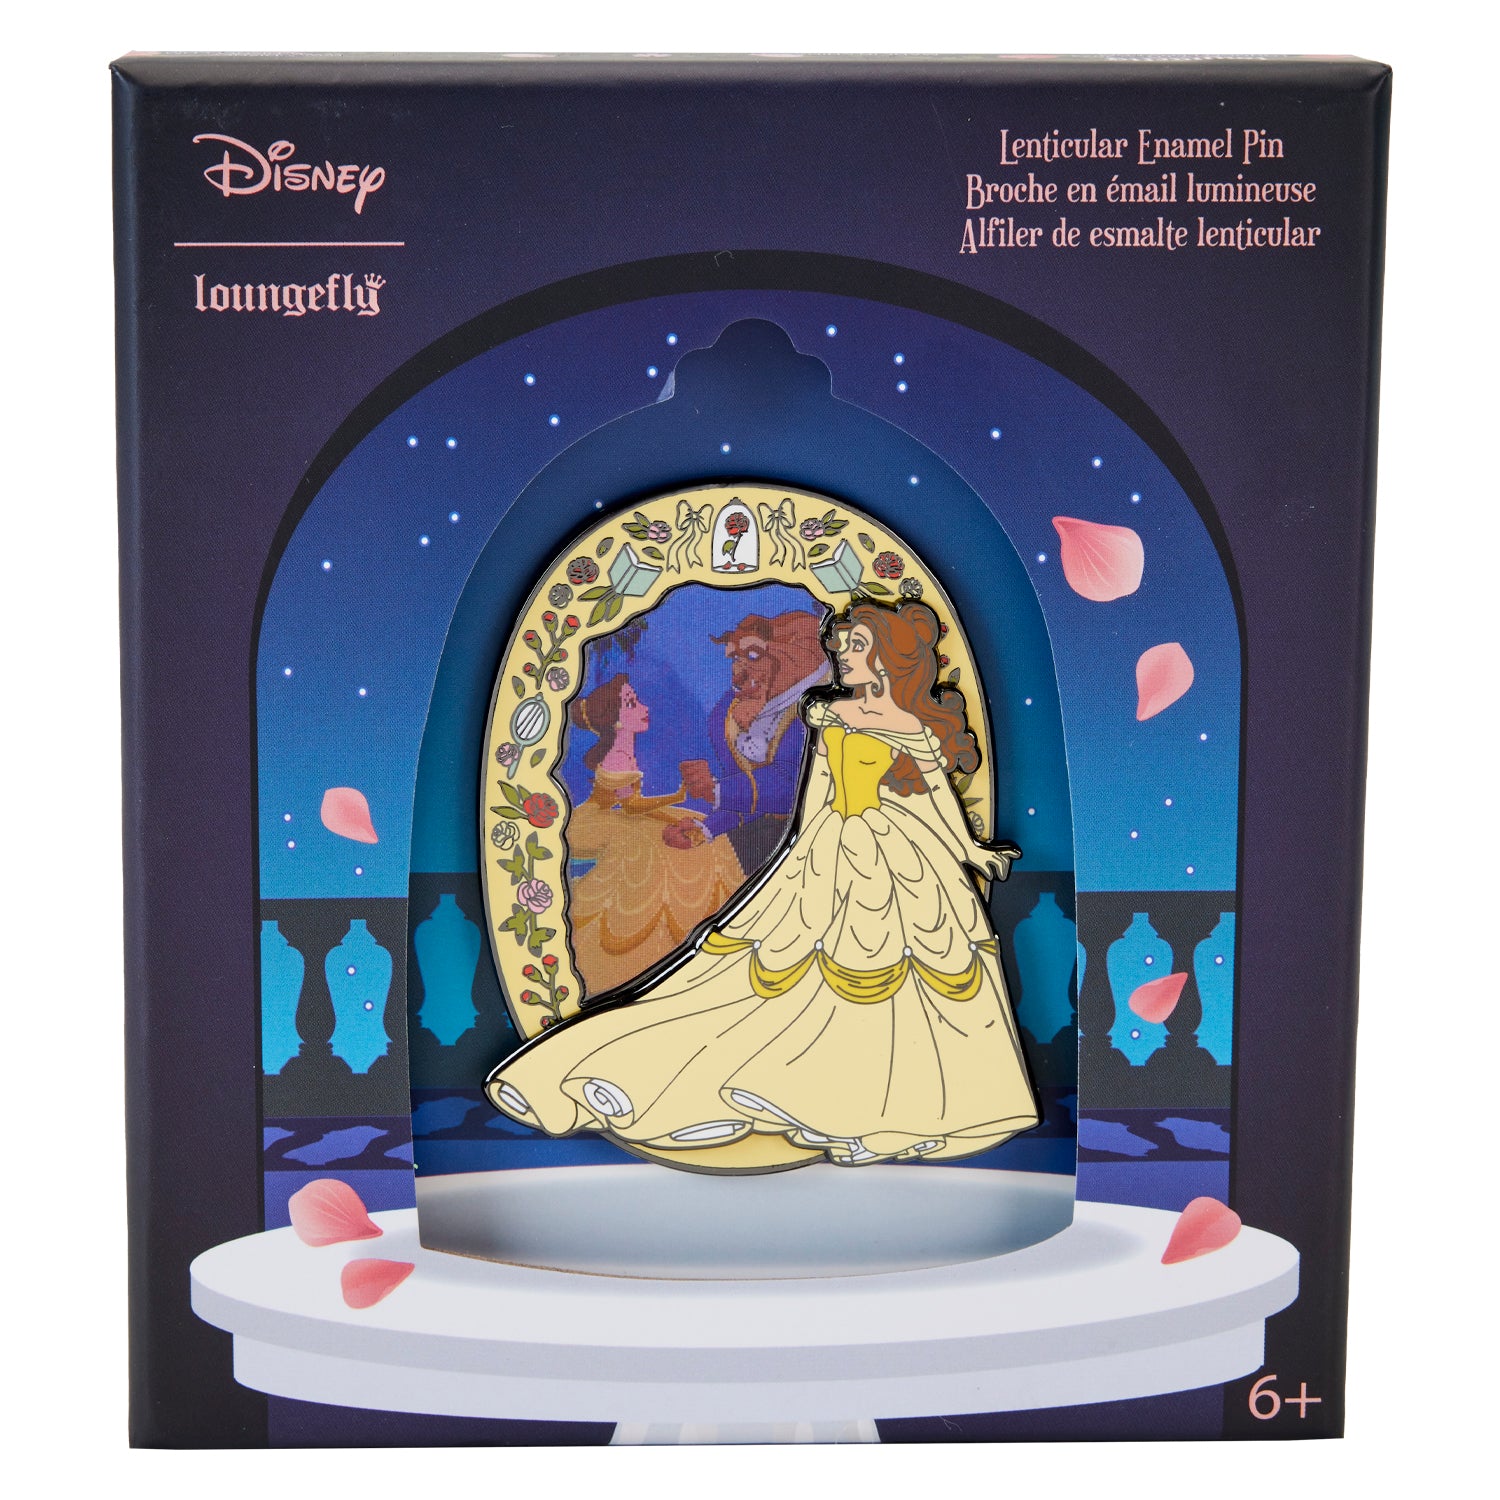 Loungefly Disney Princess Beauty And The Beast Lenticular 3" Limited Edition Collector Box Pin